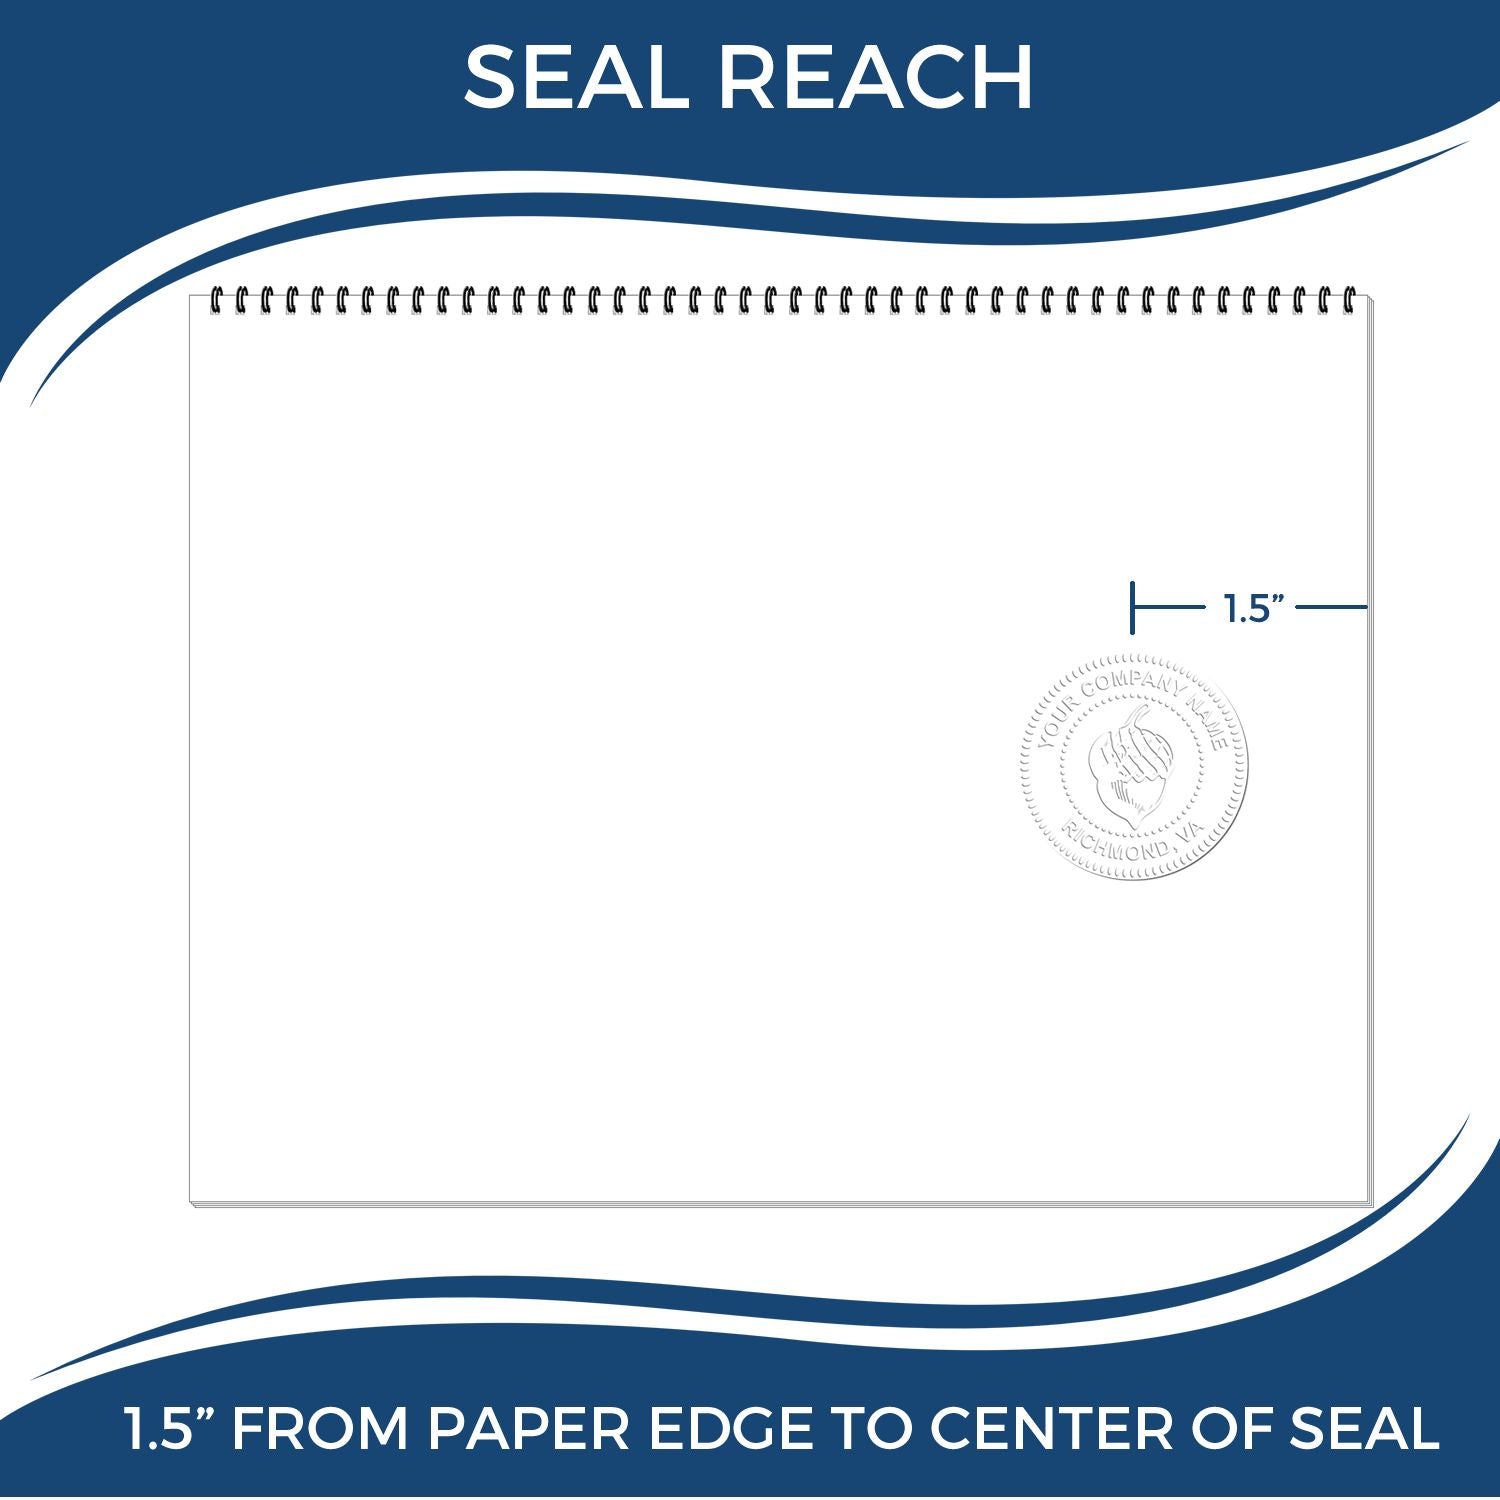 An infographic showing the seal reach which is represented by a ruler and a miniature seal image of the Hybrid Alaska Architect Seal